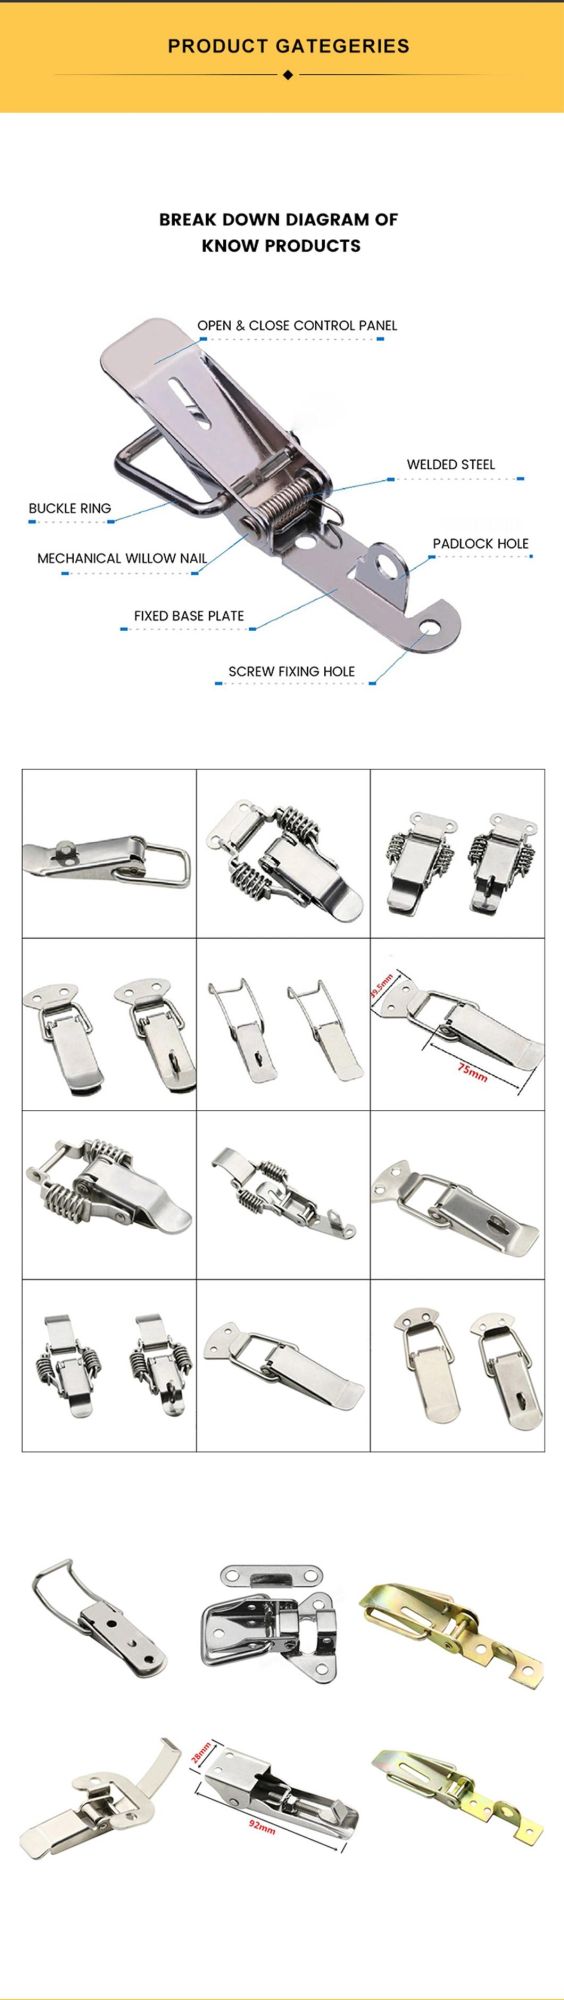 Stainless Steel Padlock Toggle Latch Used on Equipment